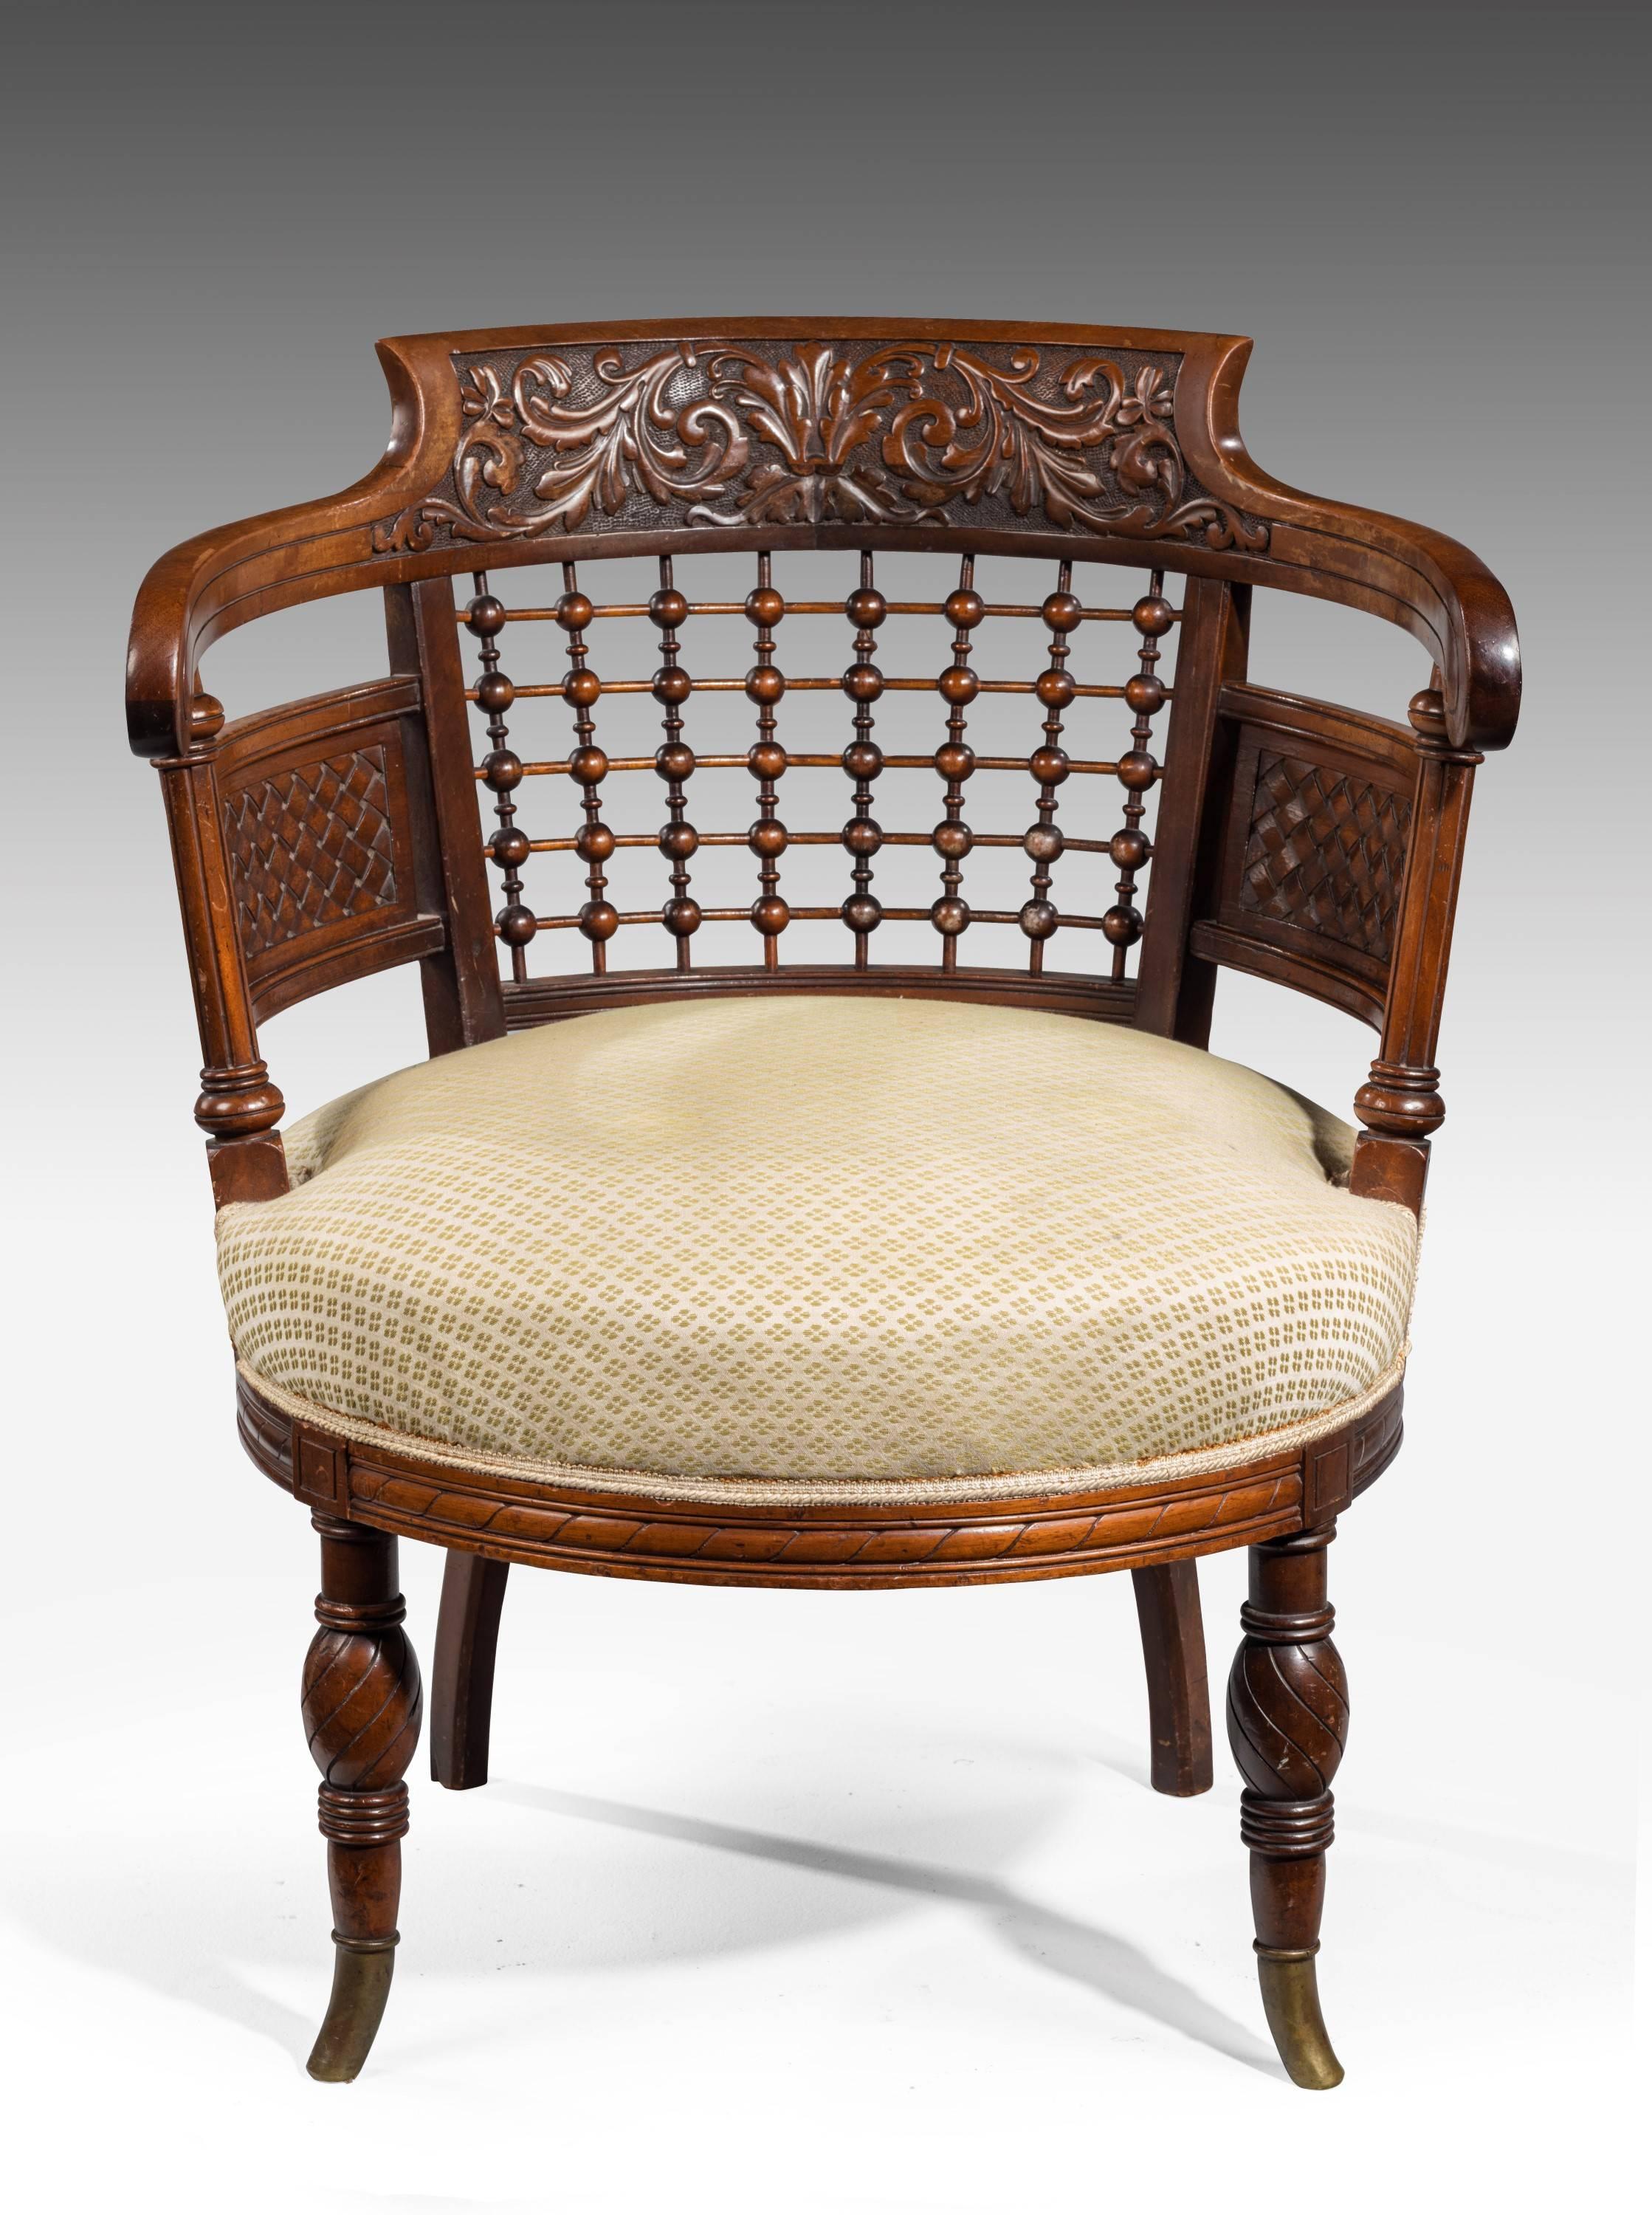 Late 19th Century Mahogany Tub Chair In Excellent Condition In Peterborough, Northamptonshire